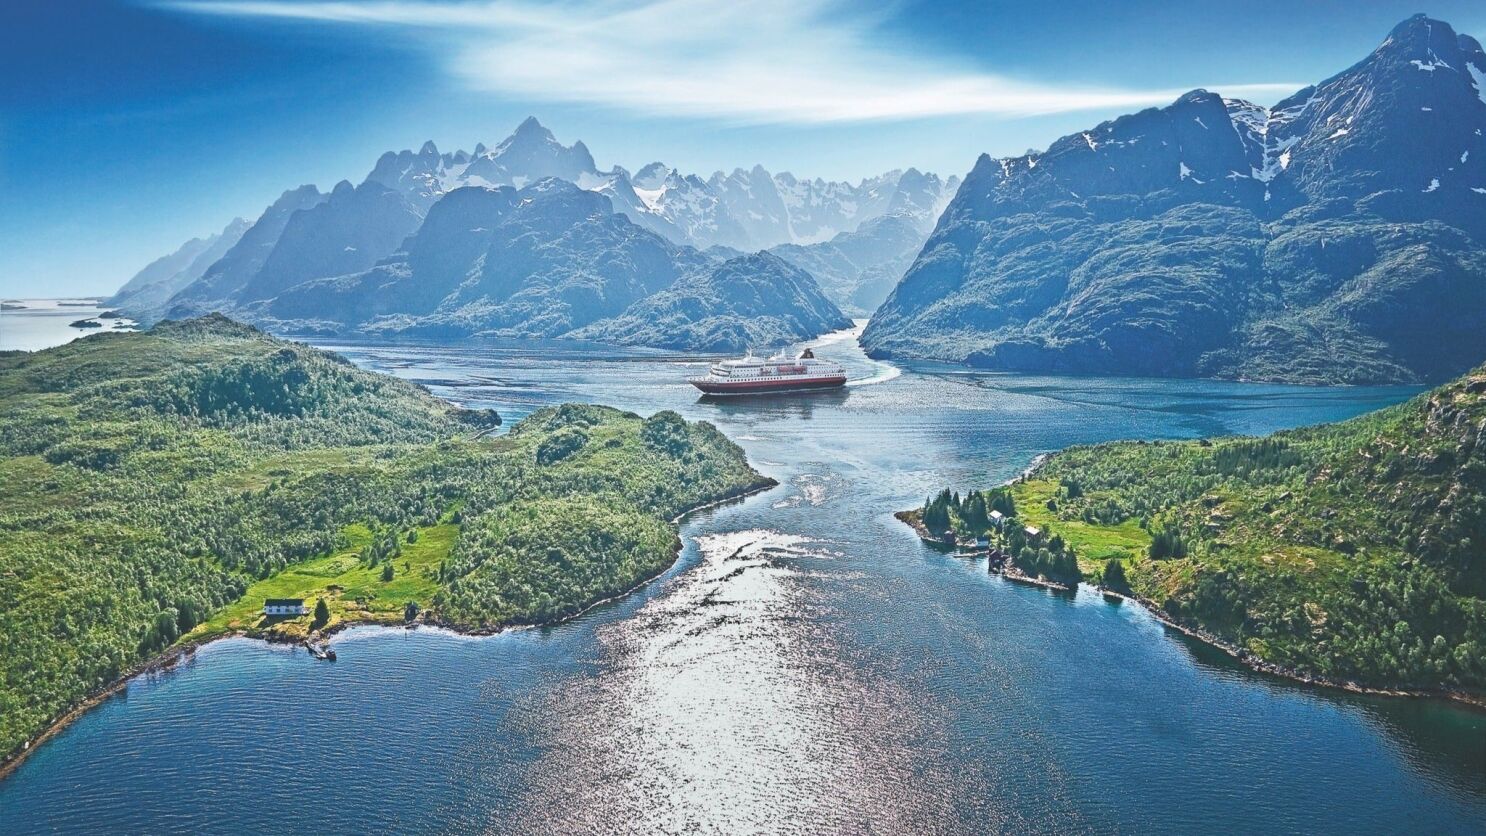 See Norway's mountains, fiords, valleys, architecture and coastline on a do-it-yourself tour Los